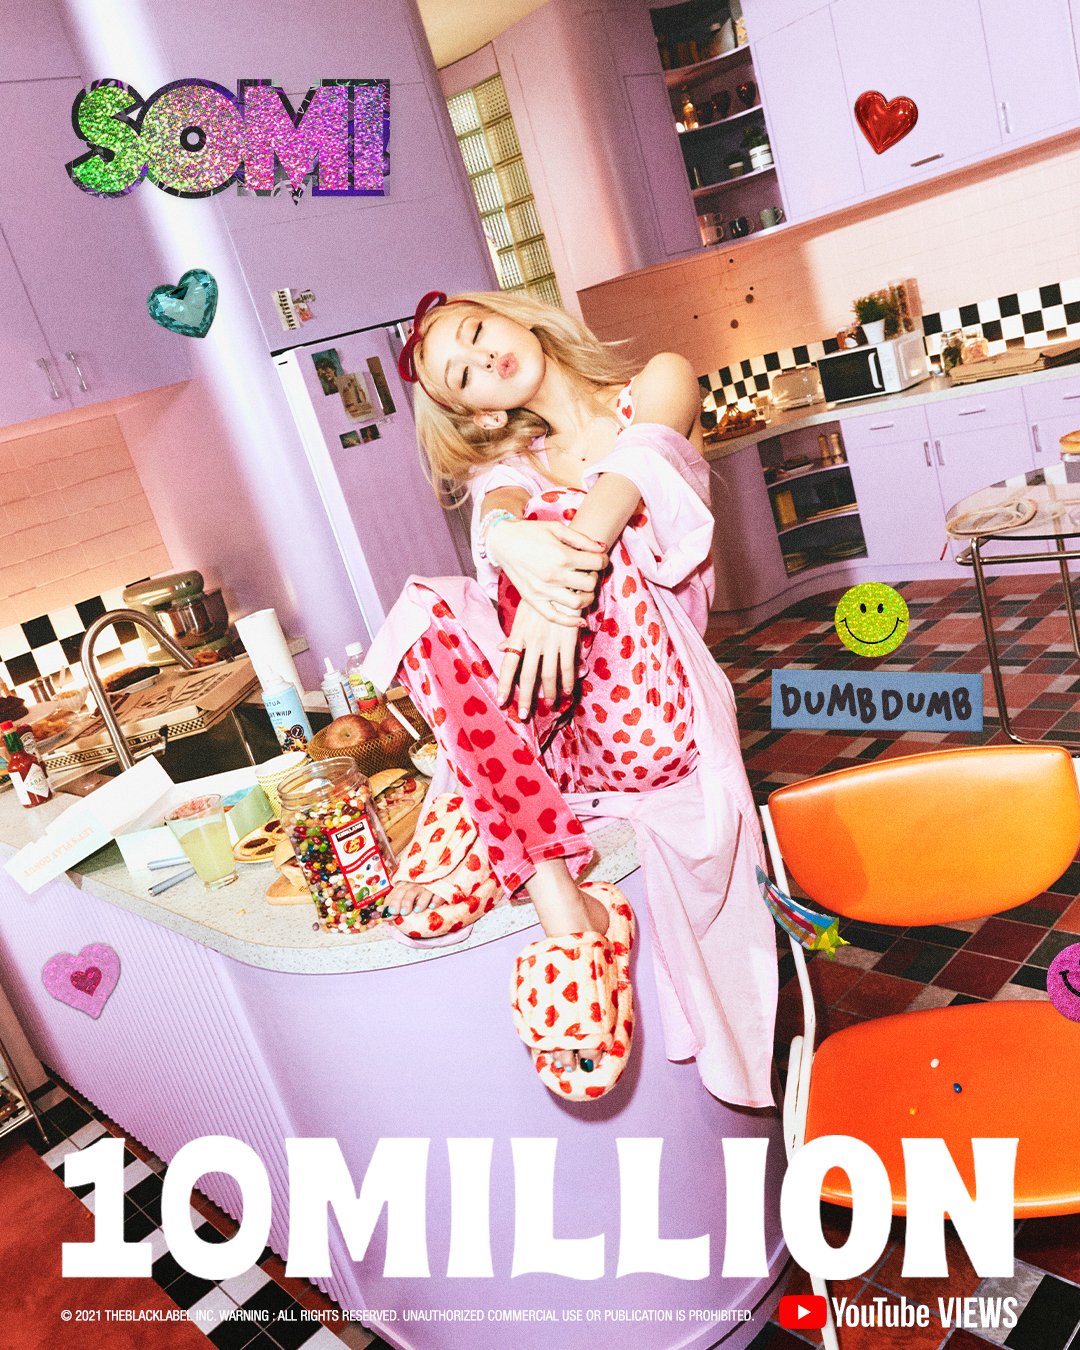 Jeon So-mi, new song 'DUMB DUMB' MV surpassed 20 million views in two days... Demonstrating Solo Power